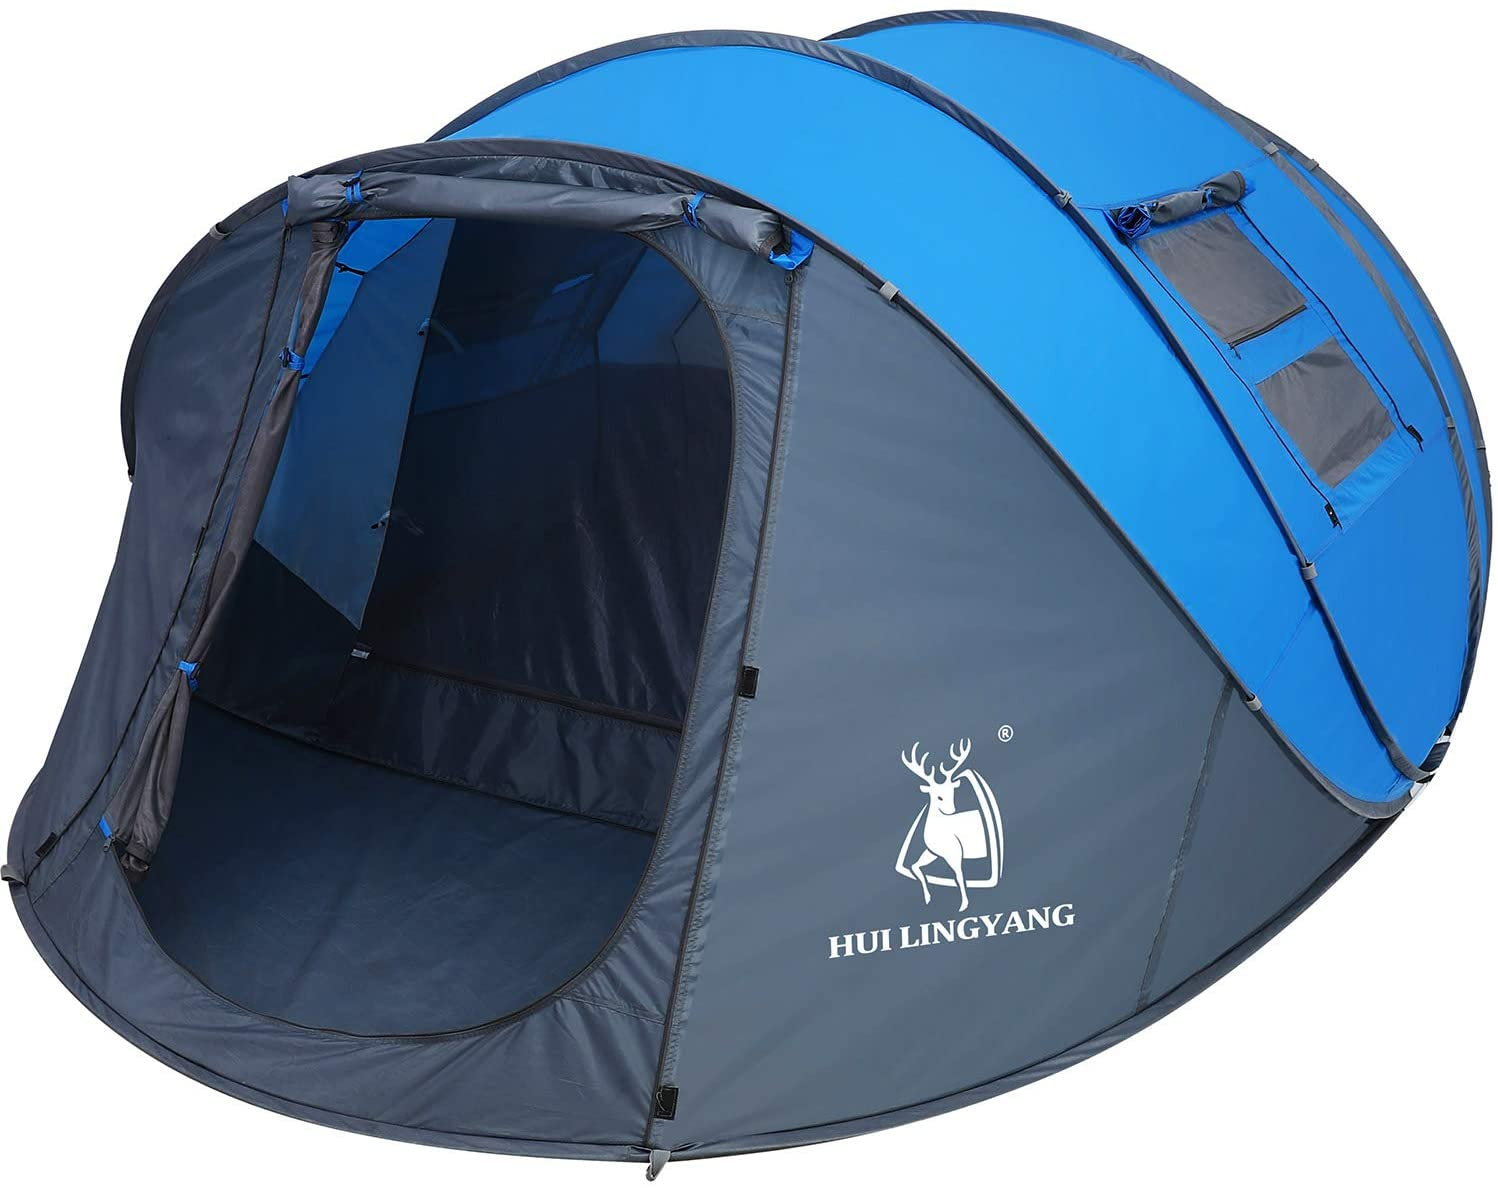 Pop up tent in two shades of blue